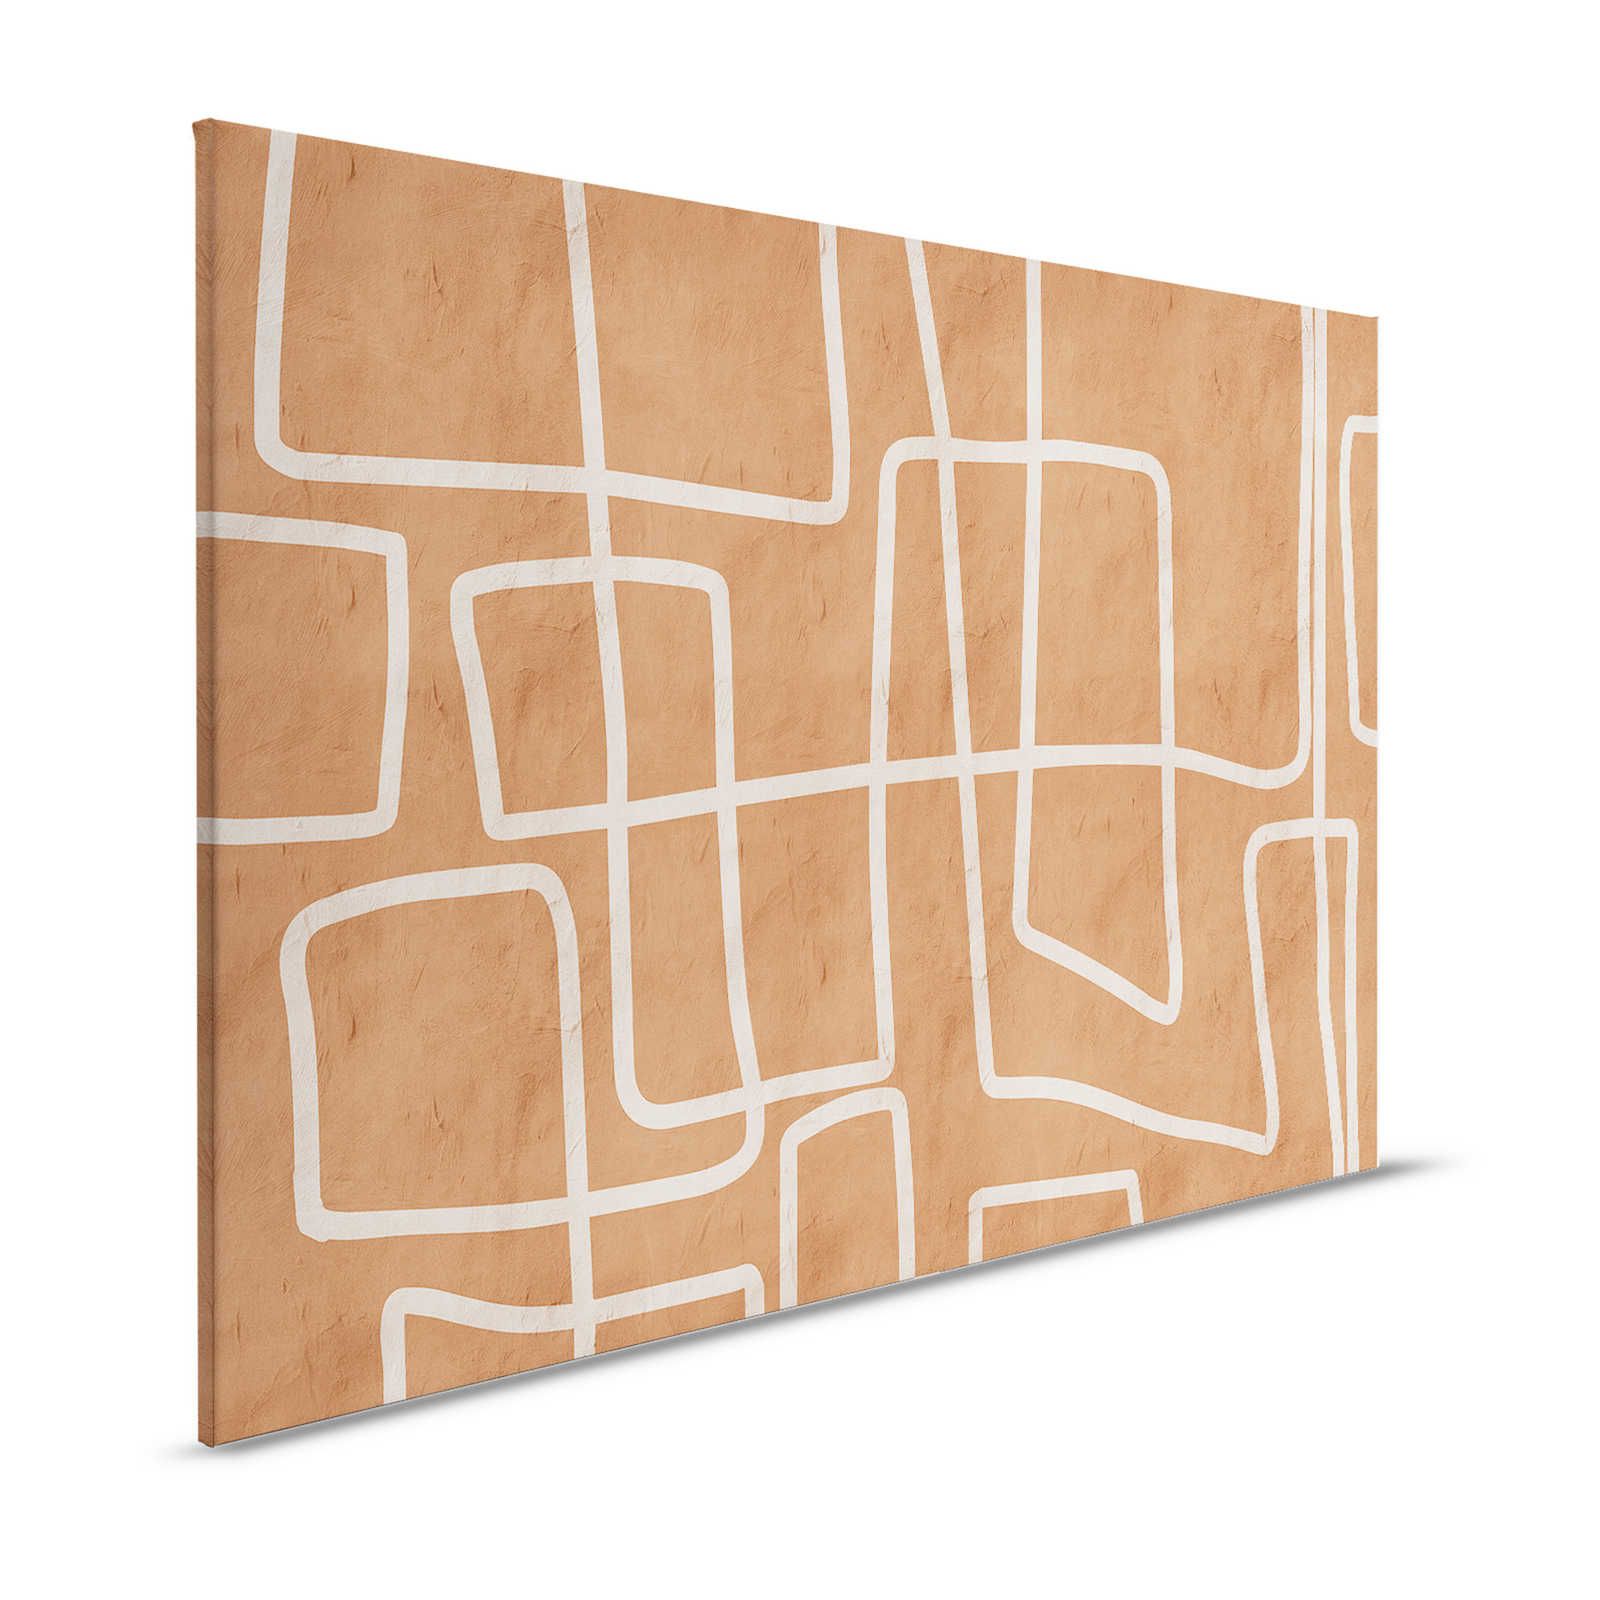 Serengeti 2 - Clay Wall Canvas Painting Terracotta with Ethno Line Pattern - 1.20 m x 0.80 m
